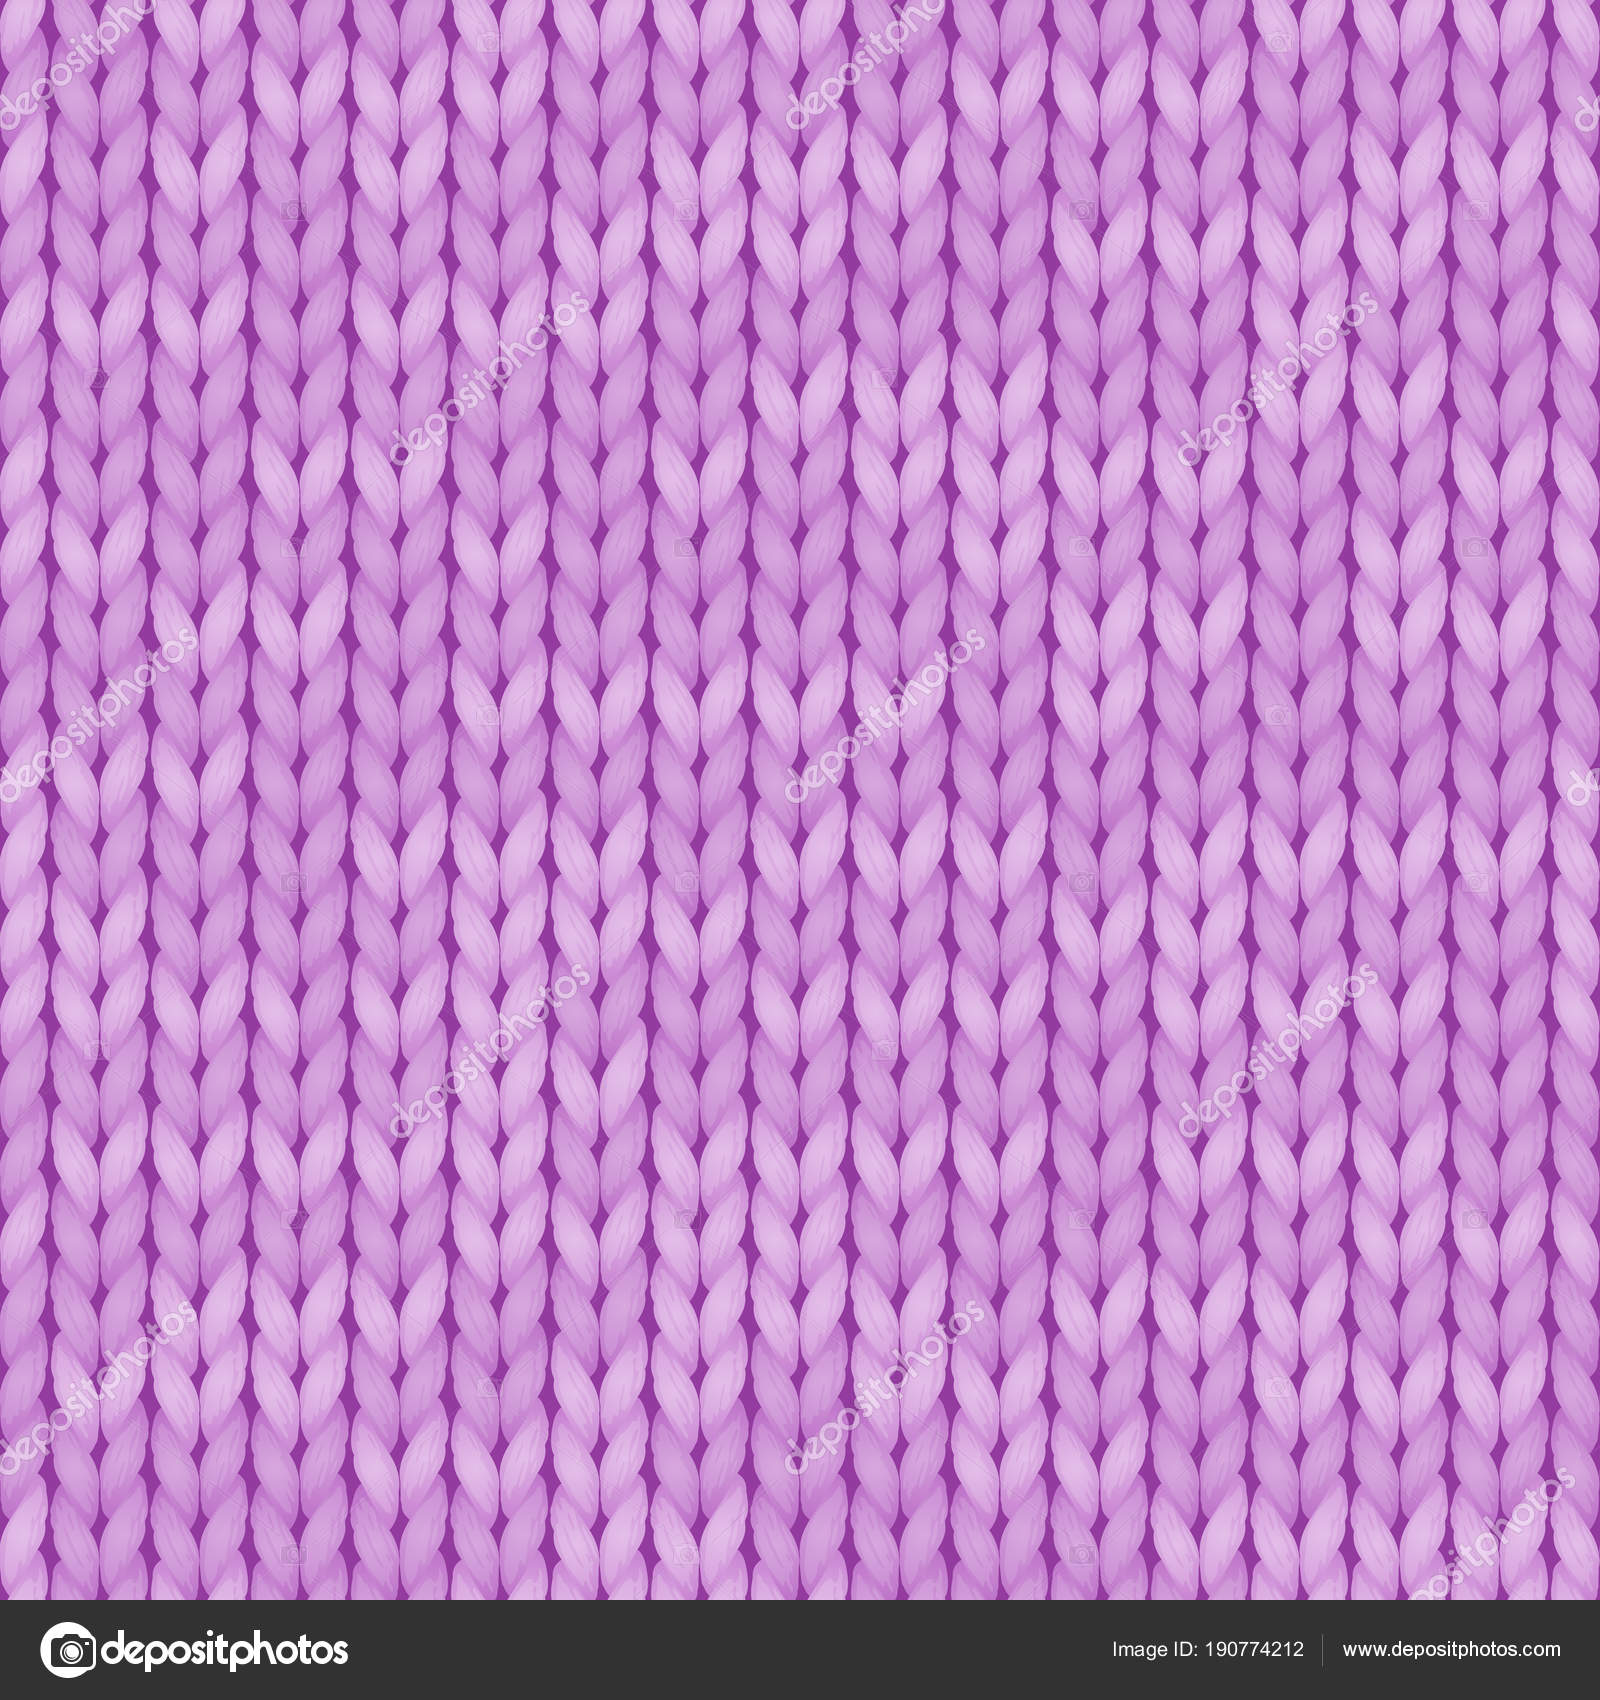 Light Violet Realistic Simple Knit Texture Seamless Pattern